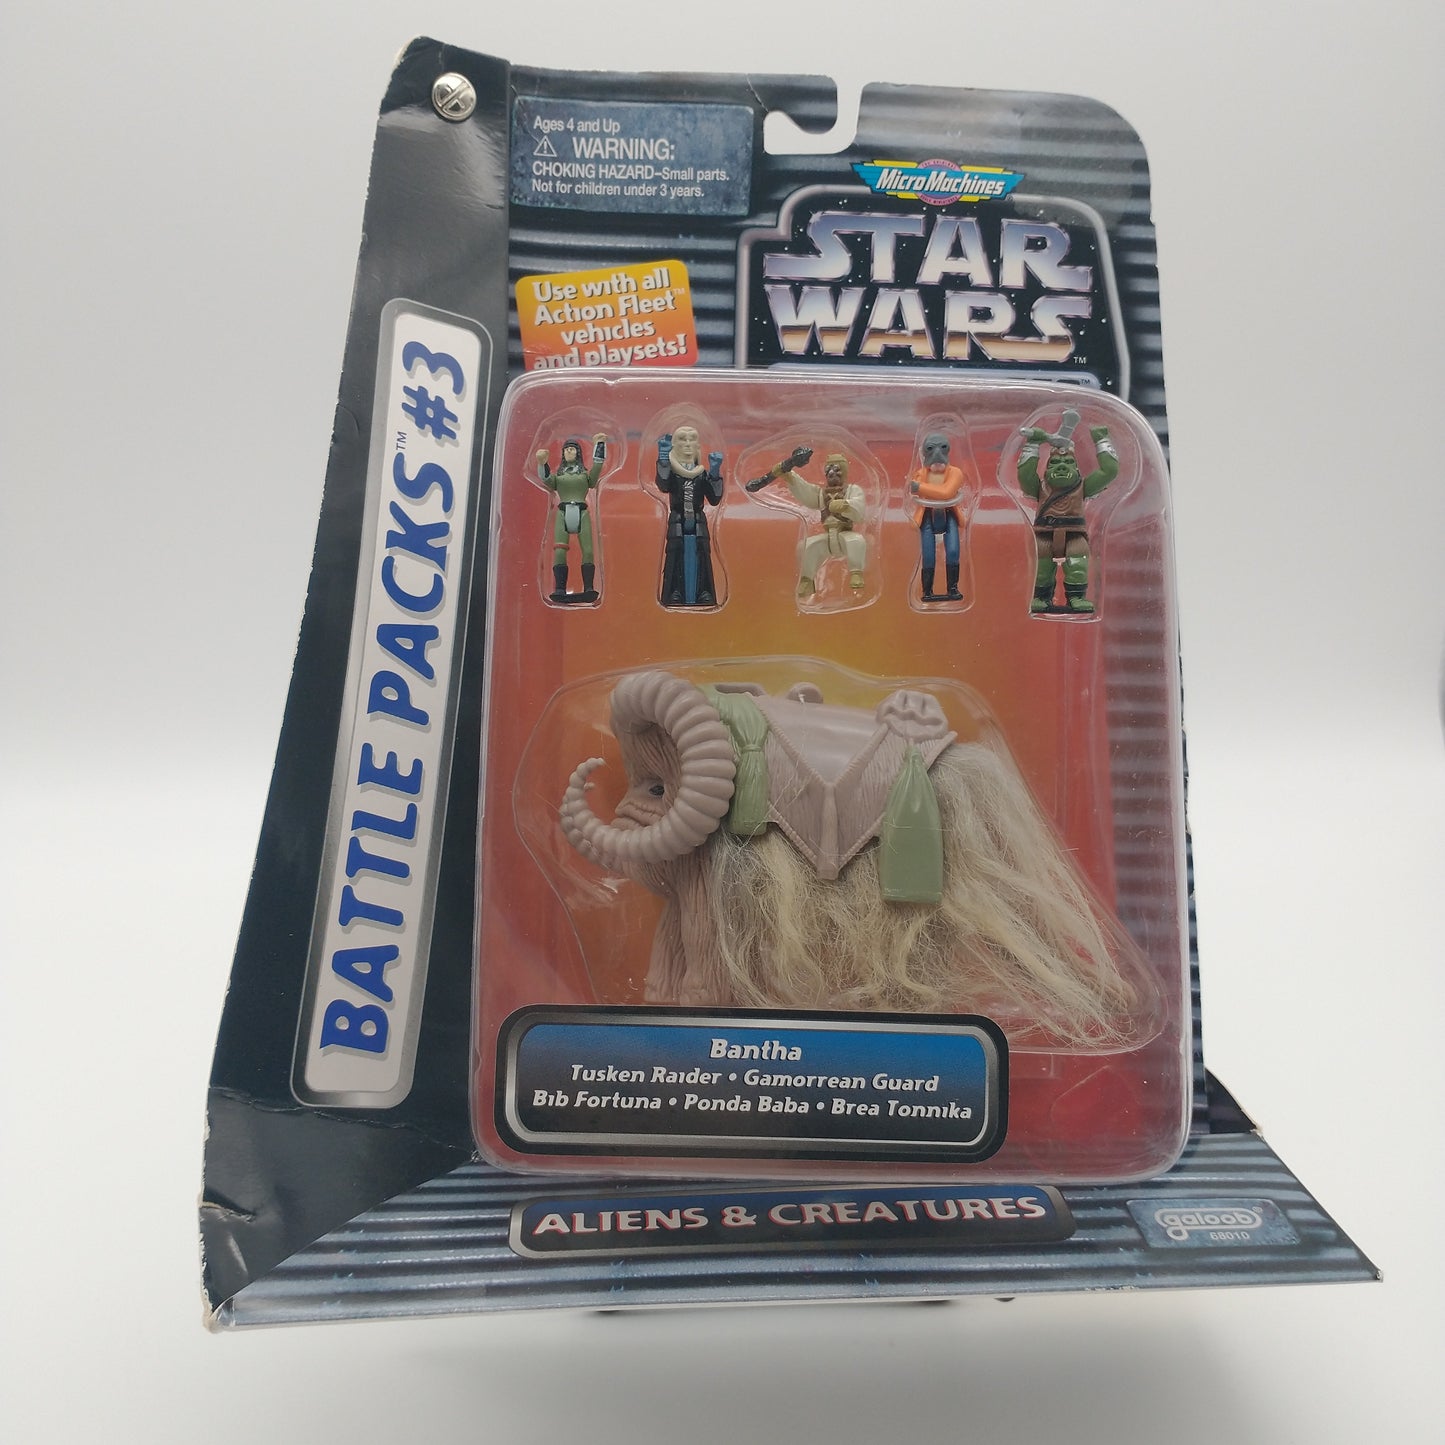 The front of the box and bubble. The bubble is sealed, the action figures inside are assorted minis of various star wars characters